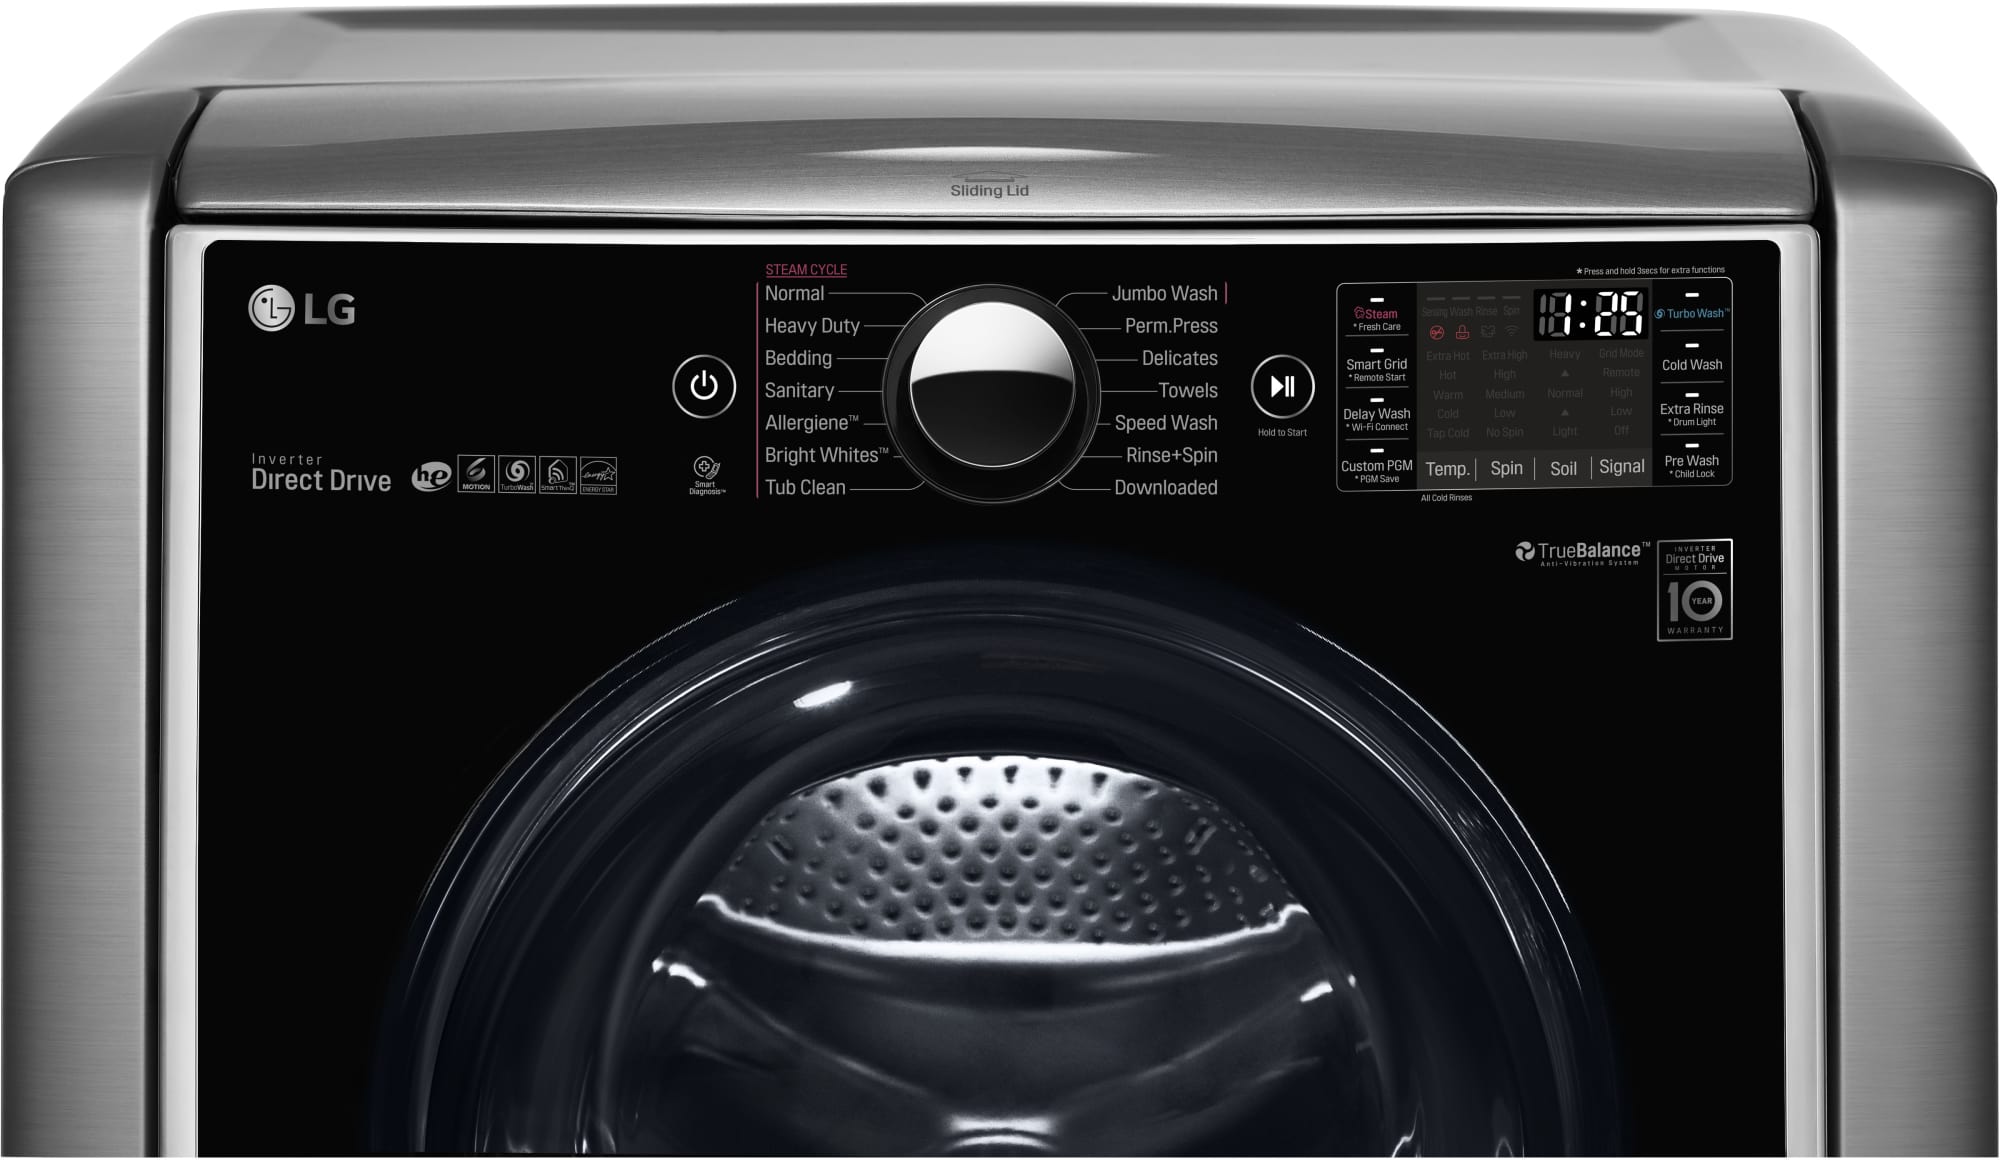 LG WM9000HVA 29 Inch 5.2 cu. ft. Front Load Washer with ...